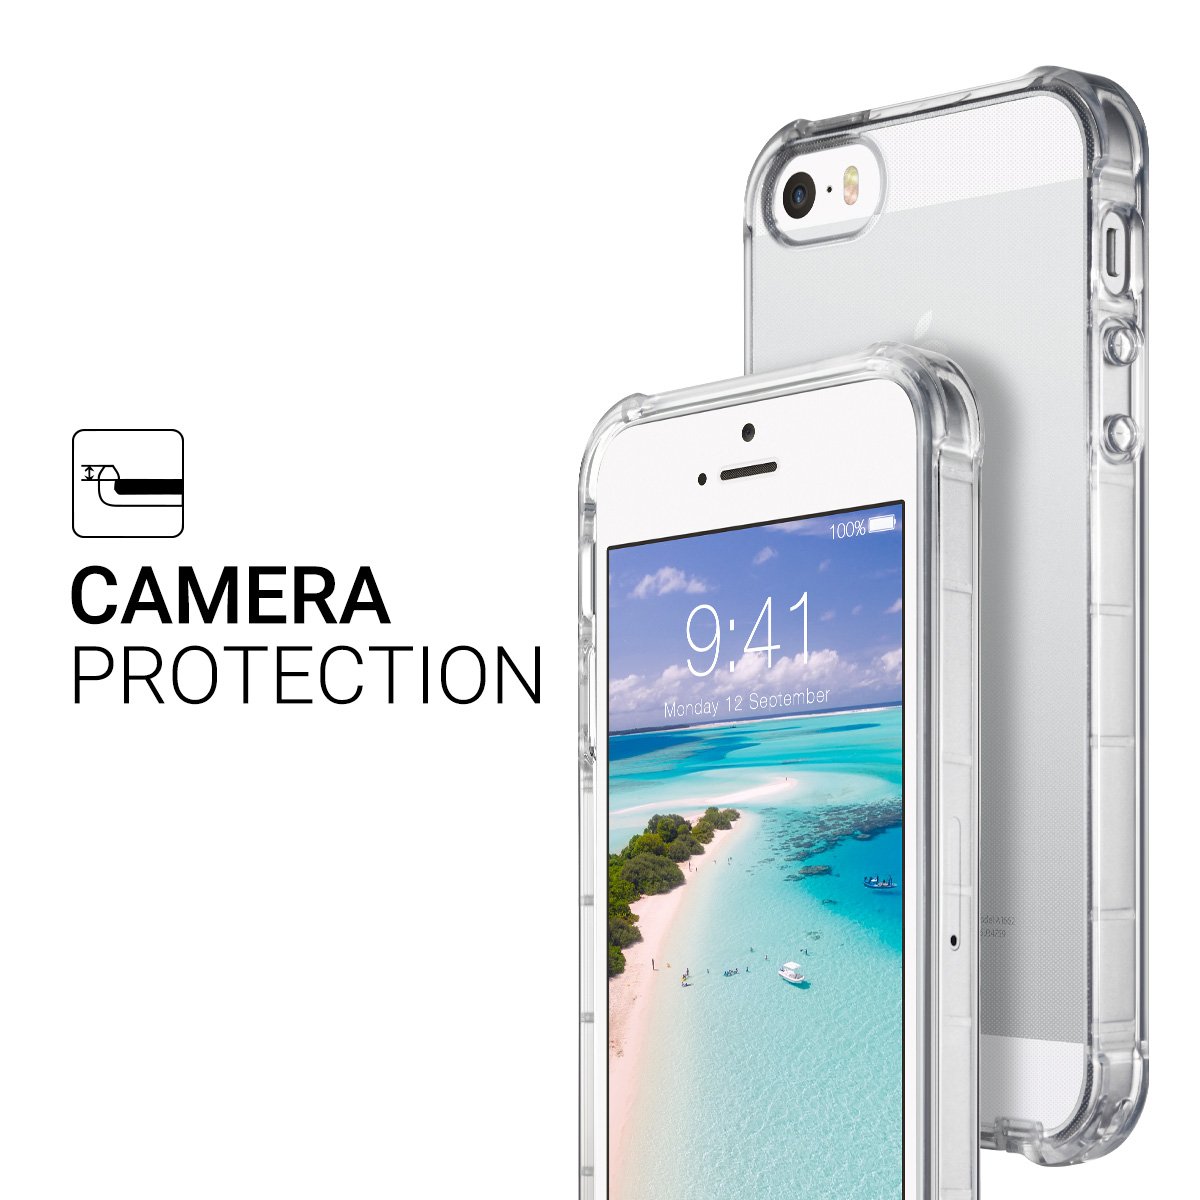 Protect your iPhone 5 with Griffin's Survivor + Catalyst waterproof case -  The Gadgeteer